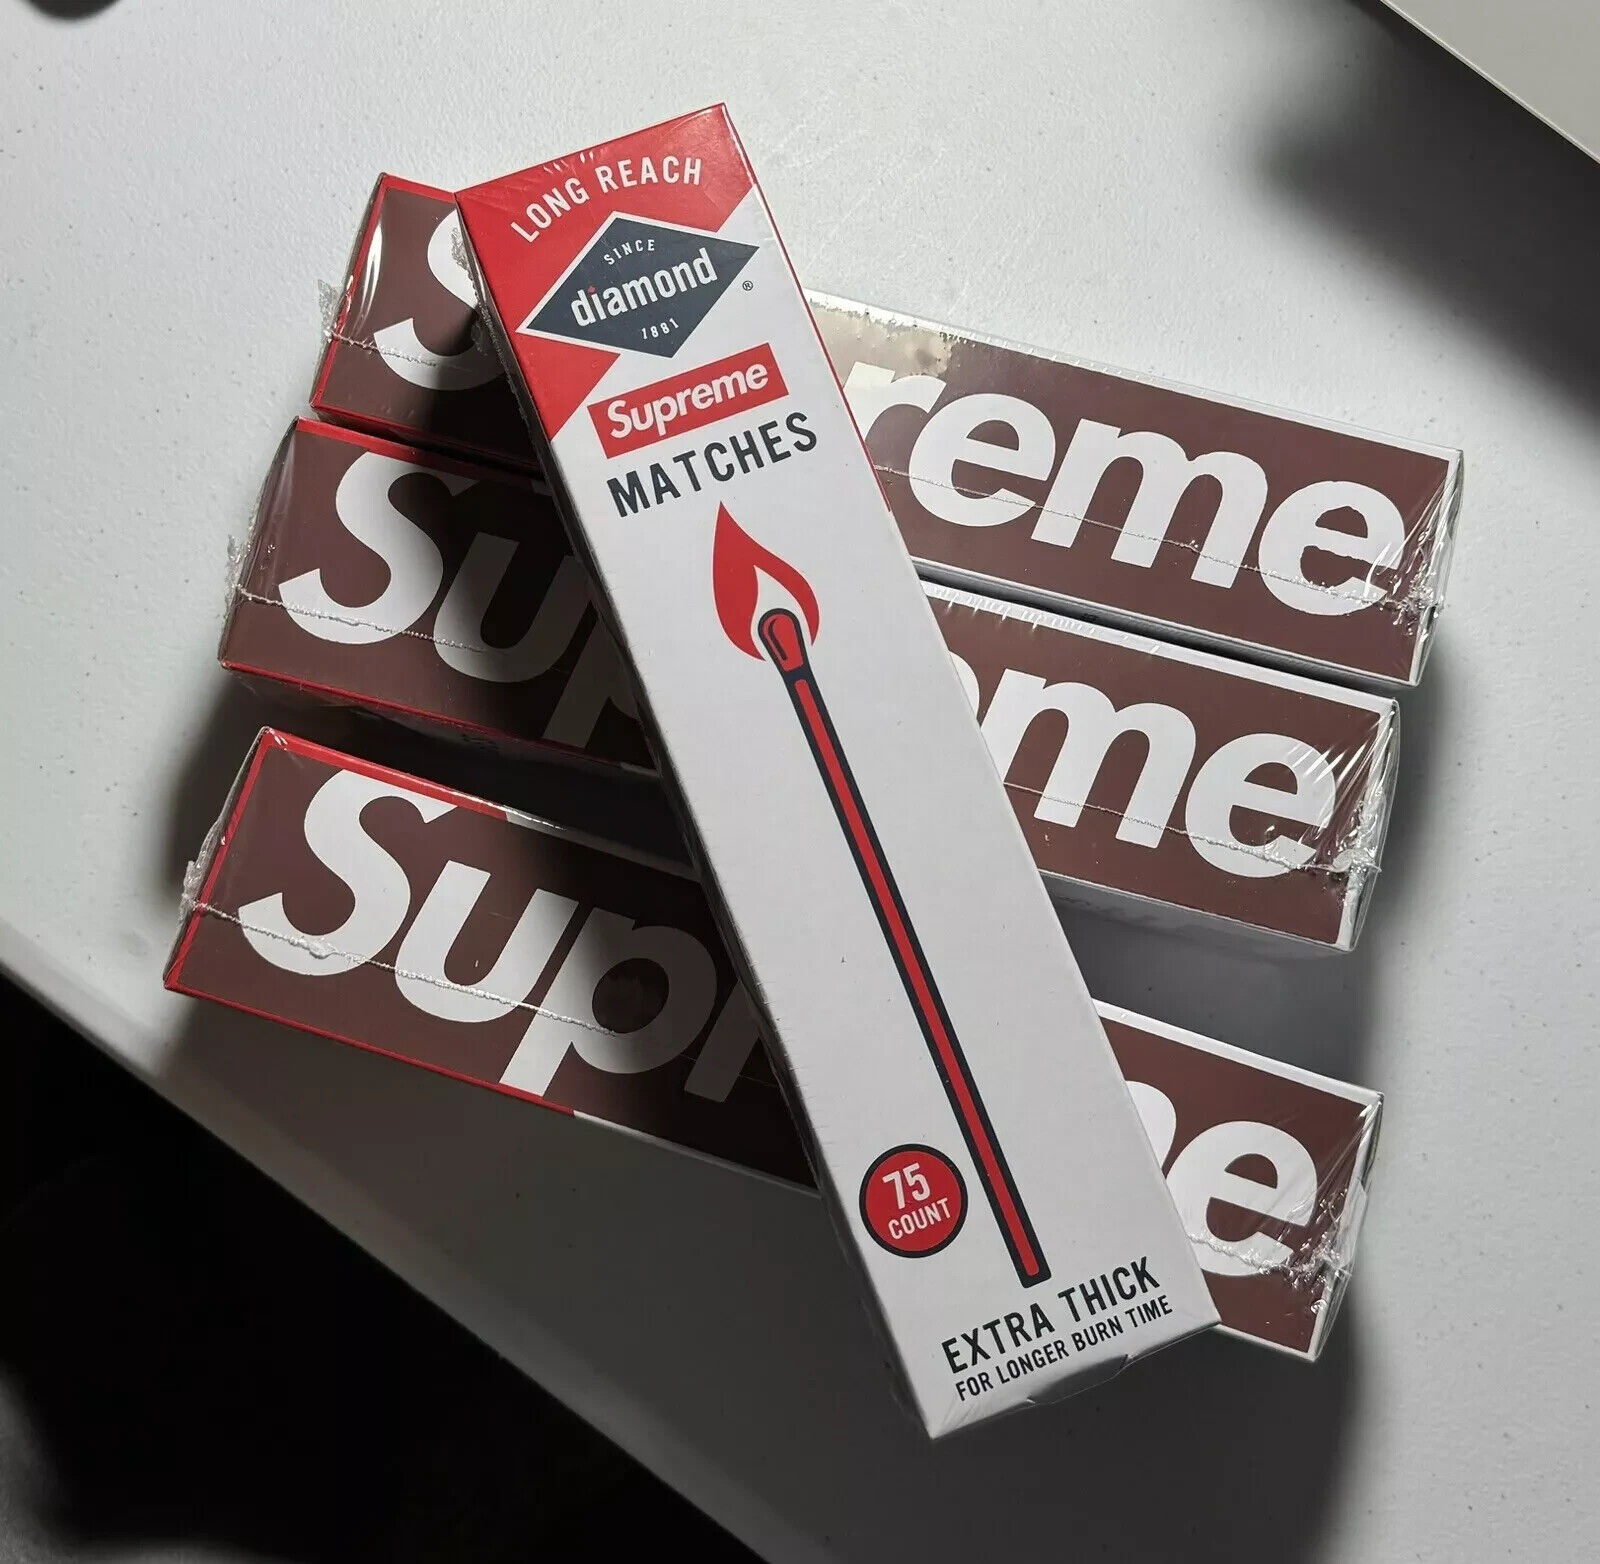 Supreme Diamond Matches Long Reach ( Box Of 75 ) FREE SUPREME STICKERS INCLUDED